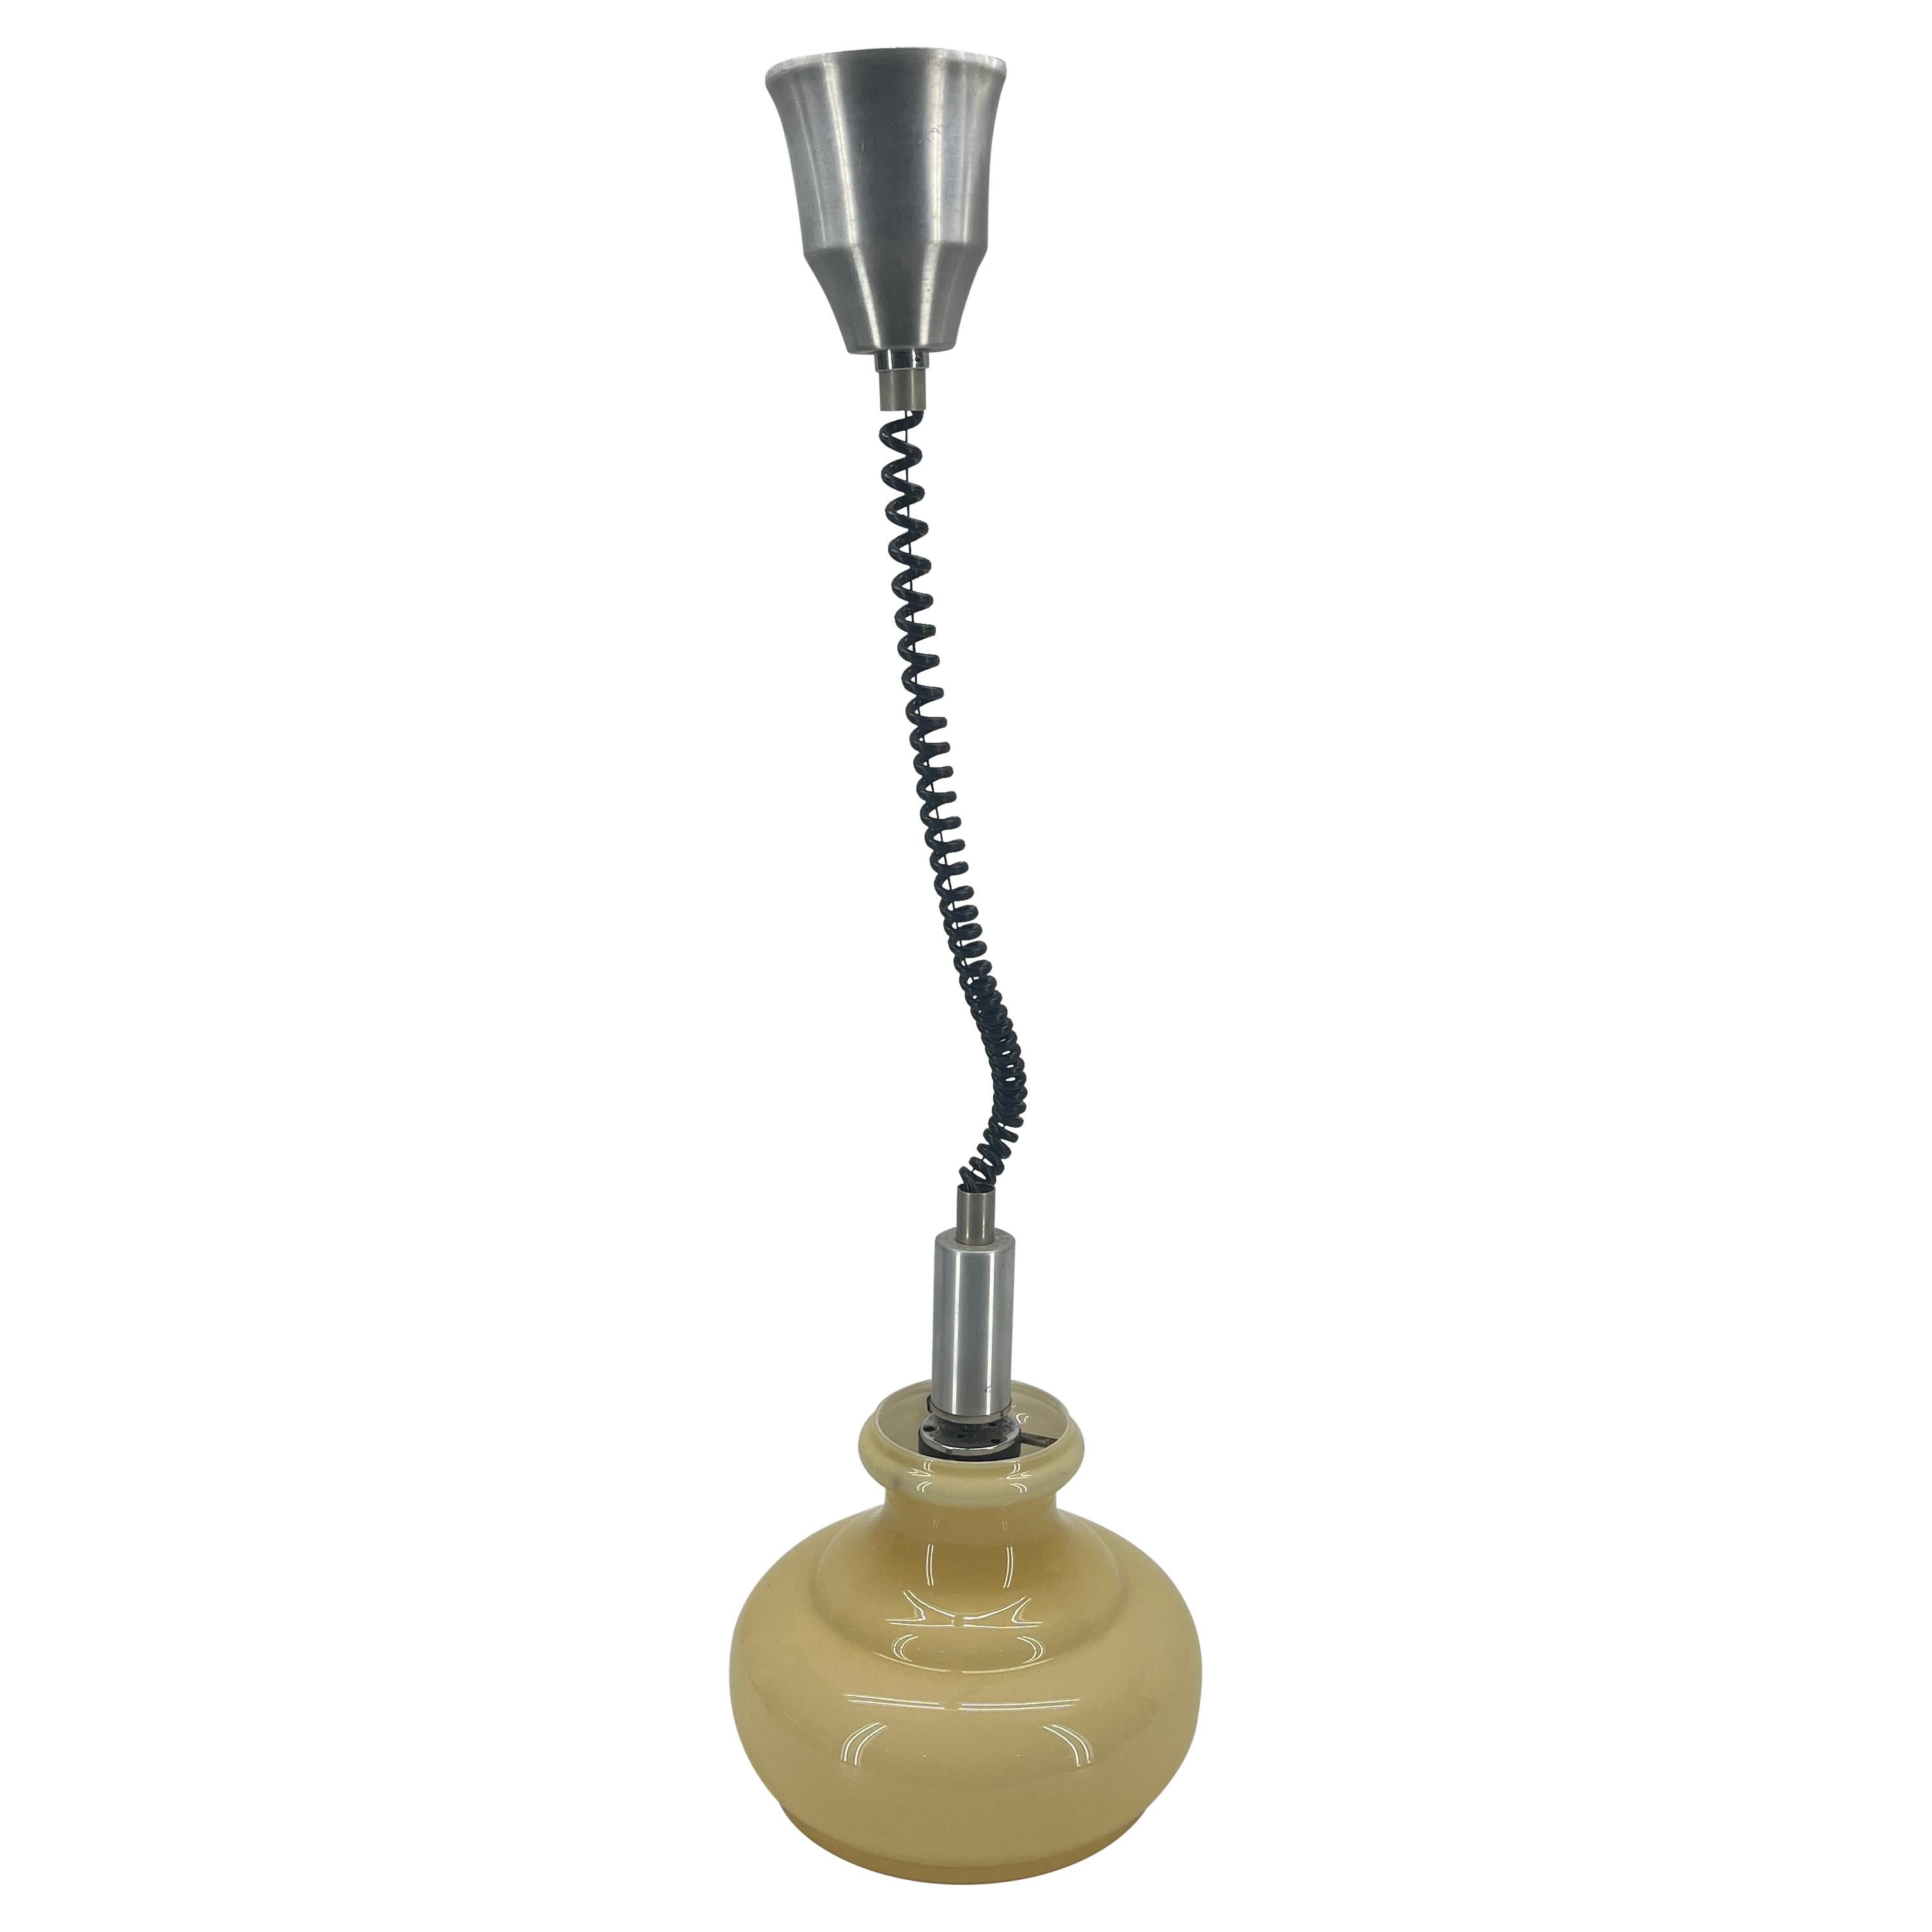 Italian blown glass pendant light with chrome accent and vintage black spiral cording. This ceiling fixture light will glow through it's milky golden tiered glass shade. The curved and graduated design make this pendant special in any area of the